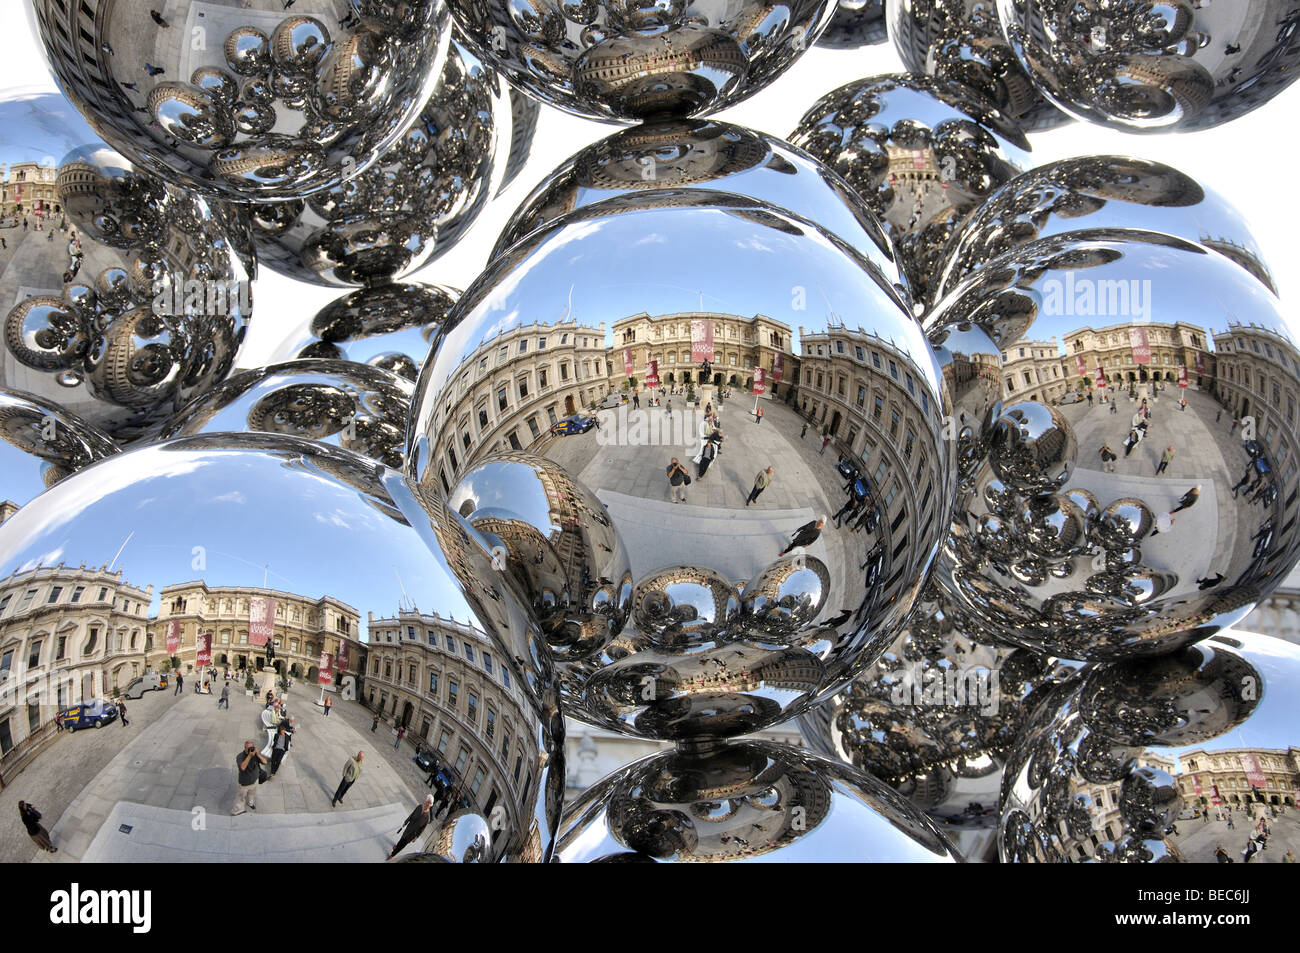 Sculpture by Anish Kapoor in front of The Royal Academy, Piccadilly, City of Westminster, London, England, United Kingdom Stock Photo